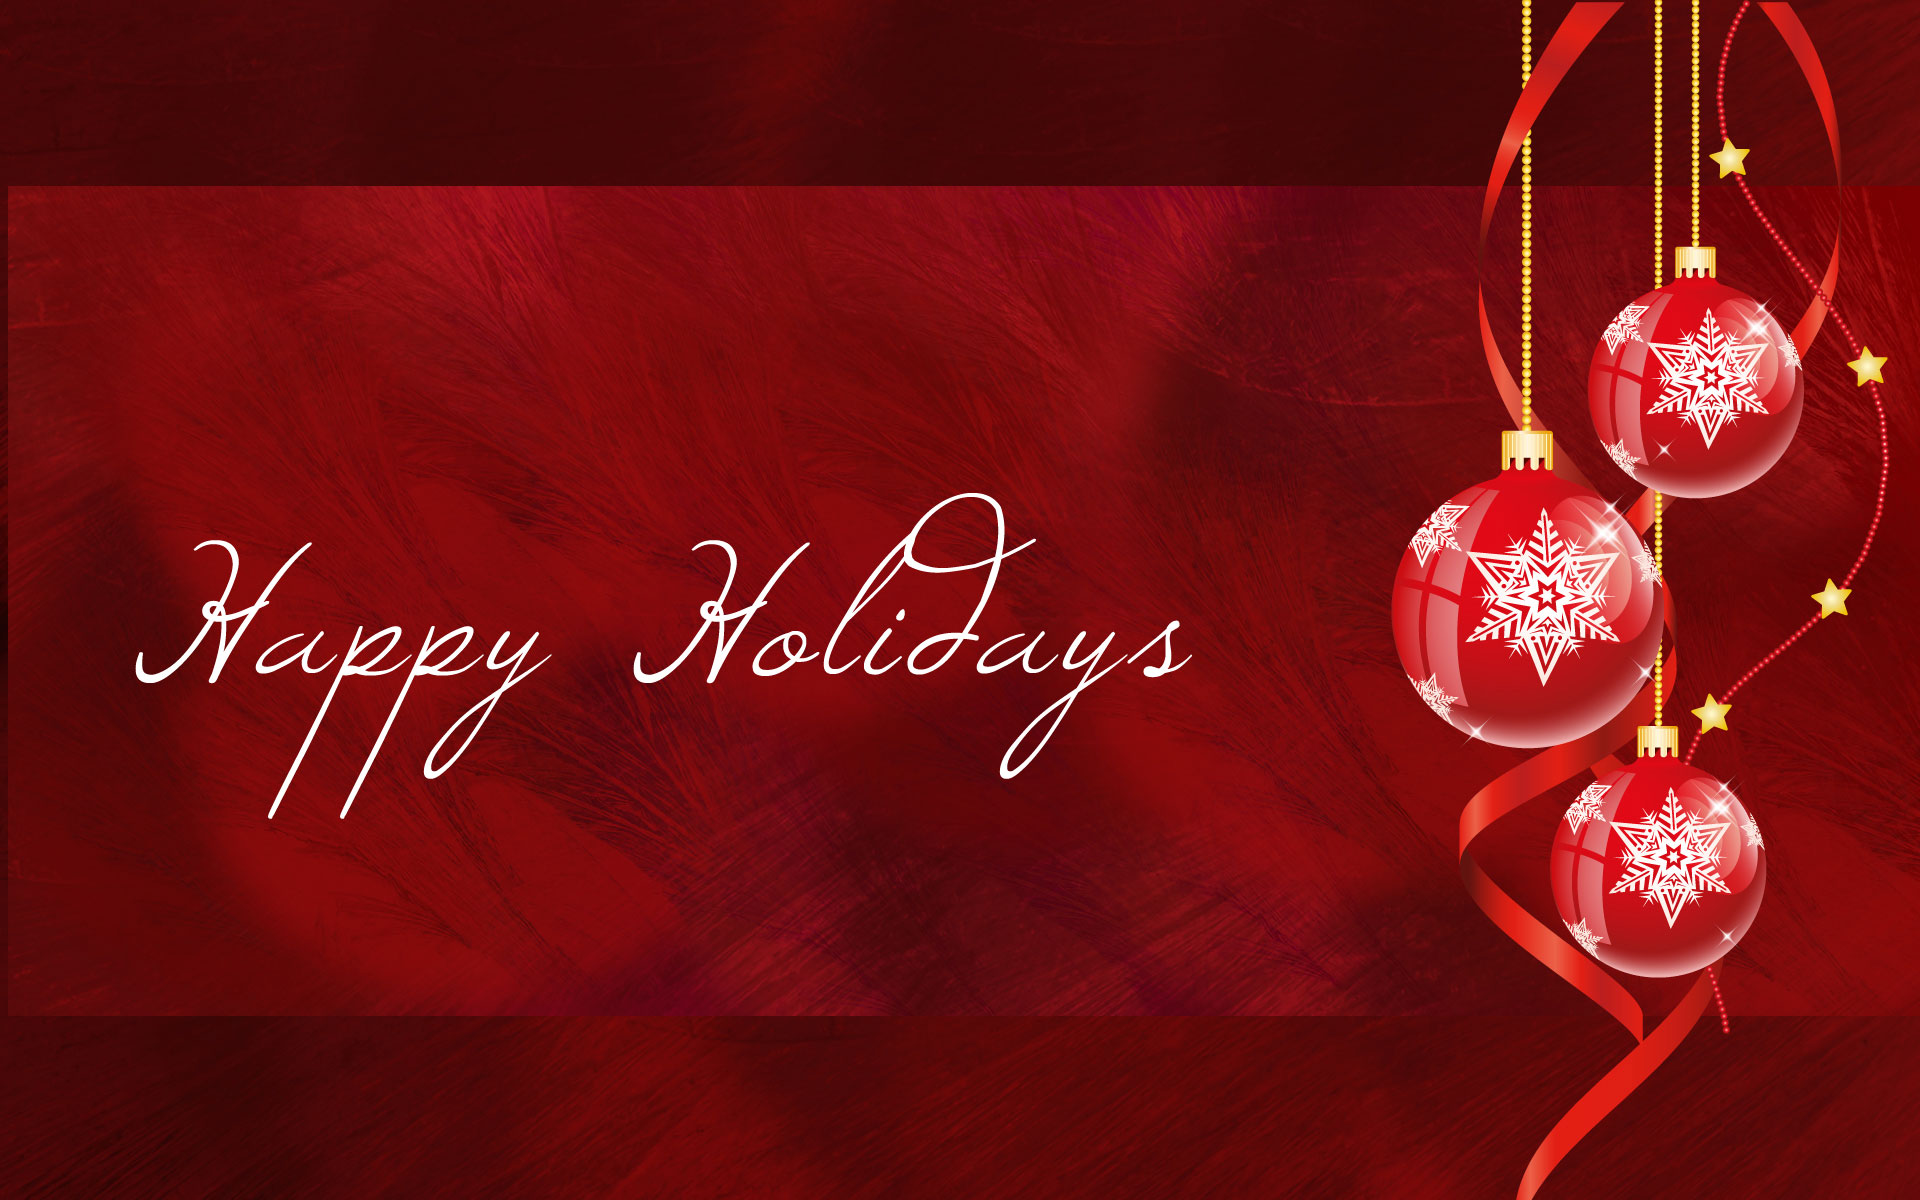 Holiday Background Wallpaper Adorable HDq